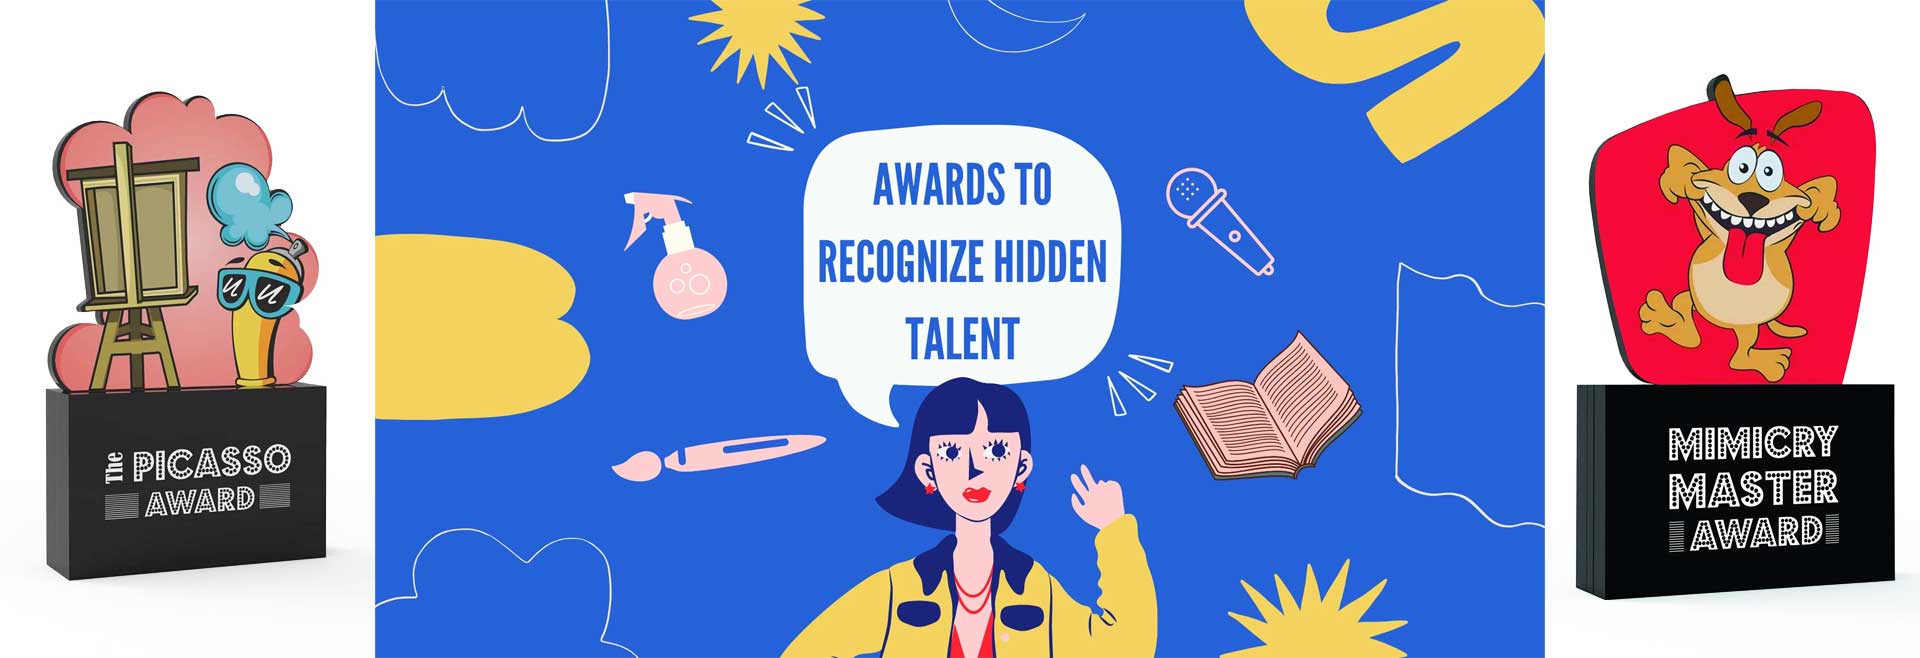 Awards to Recognize Hidden Talent